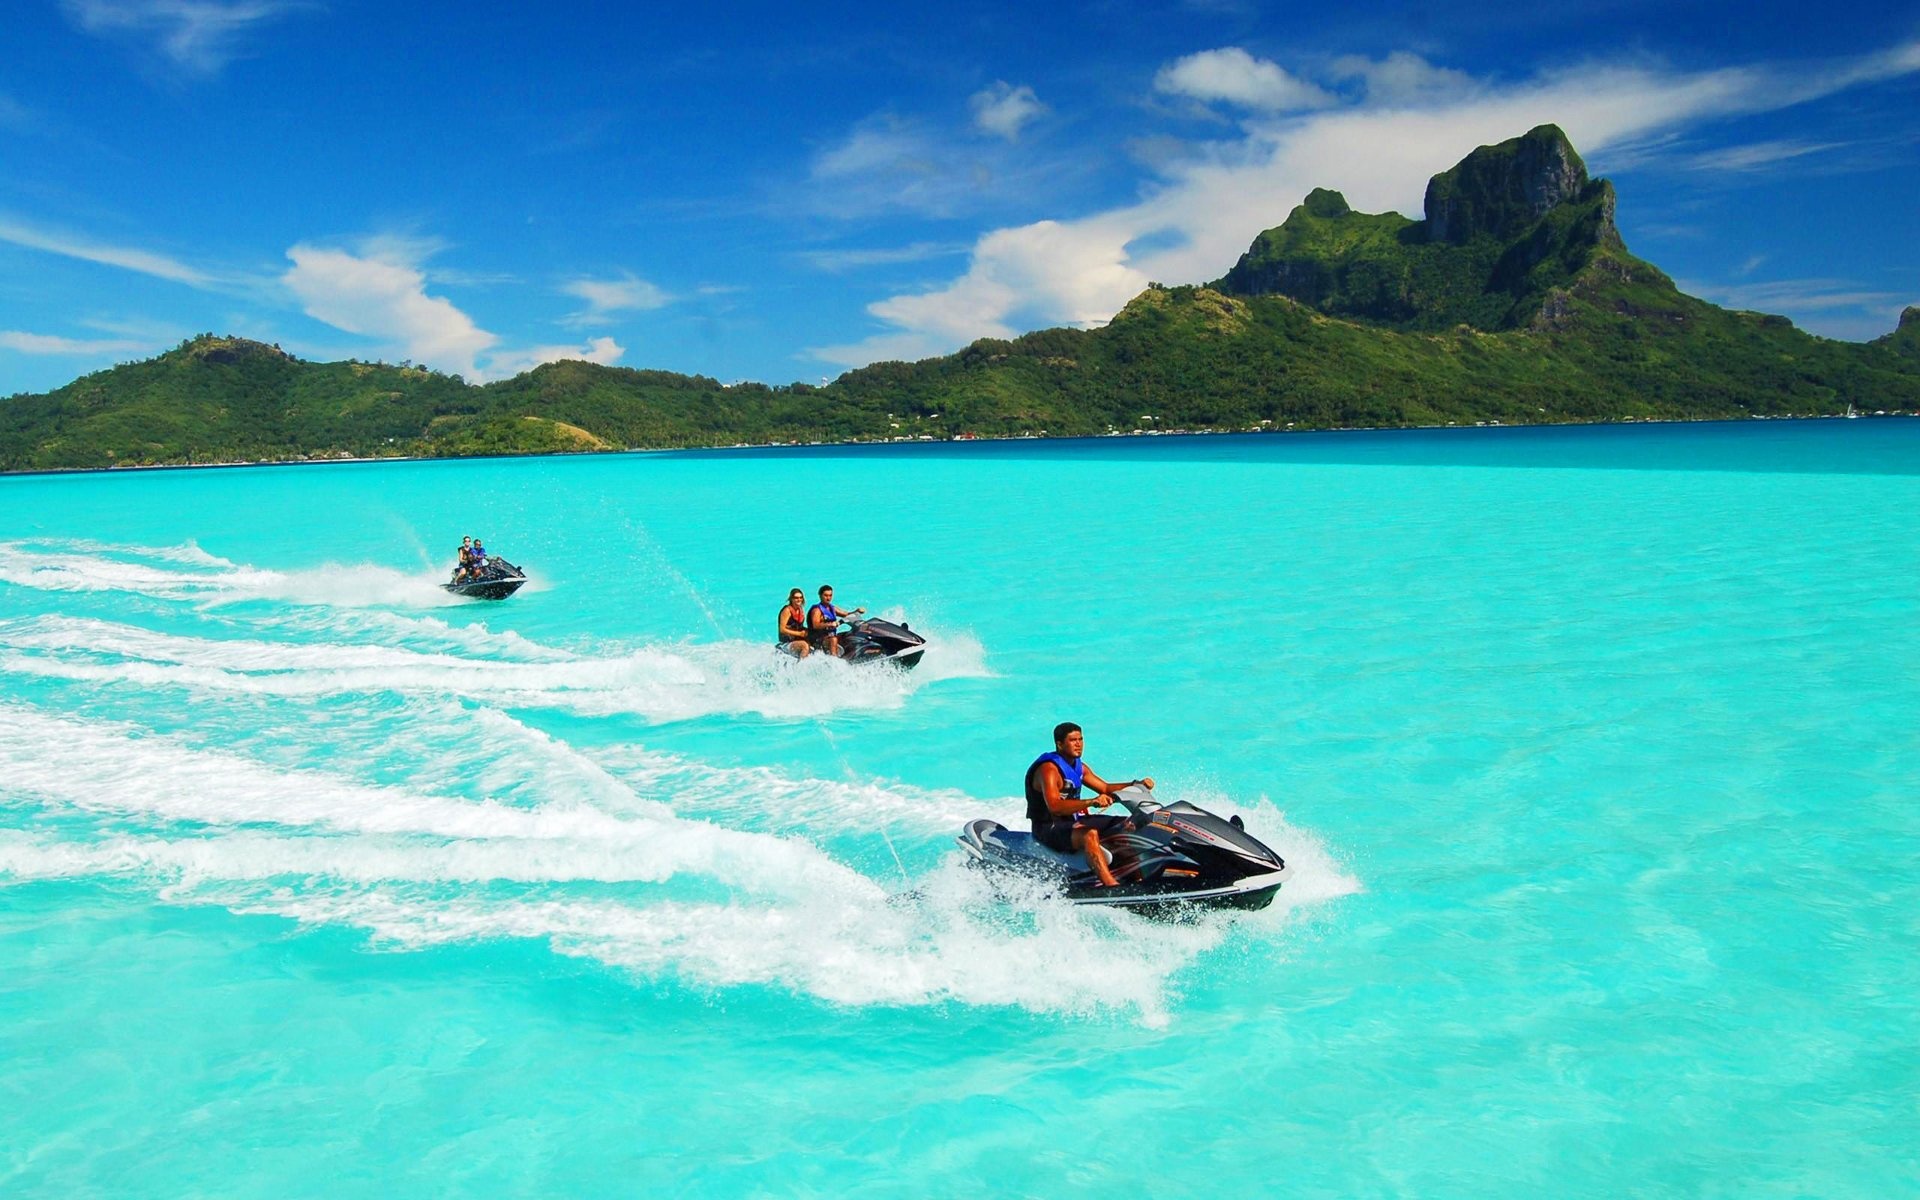 Jet ski adventures, HD wallpapers, Exciting water sports, Thrilling rides, 1920x1200 HD Desktop